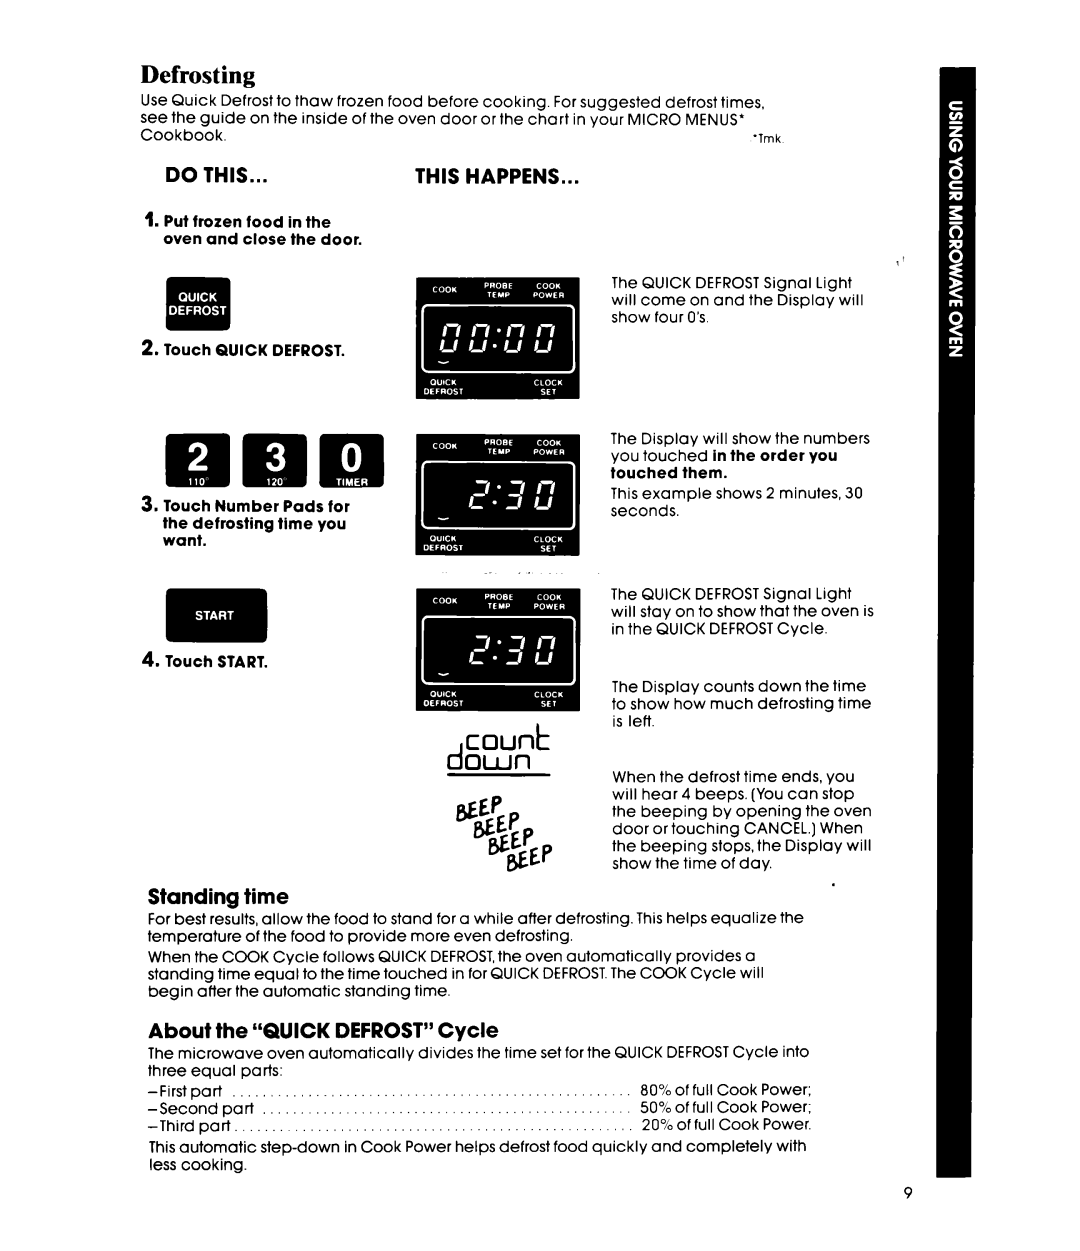 Whirlpool MW8520XP manual tiEP tiEPp gjEP, count down, Defrosting, Standing time, About the ‘QUICK DEFROST” Cycle, Do This 